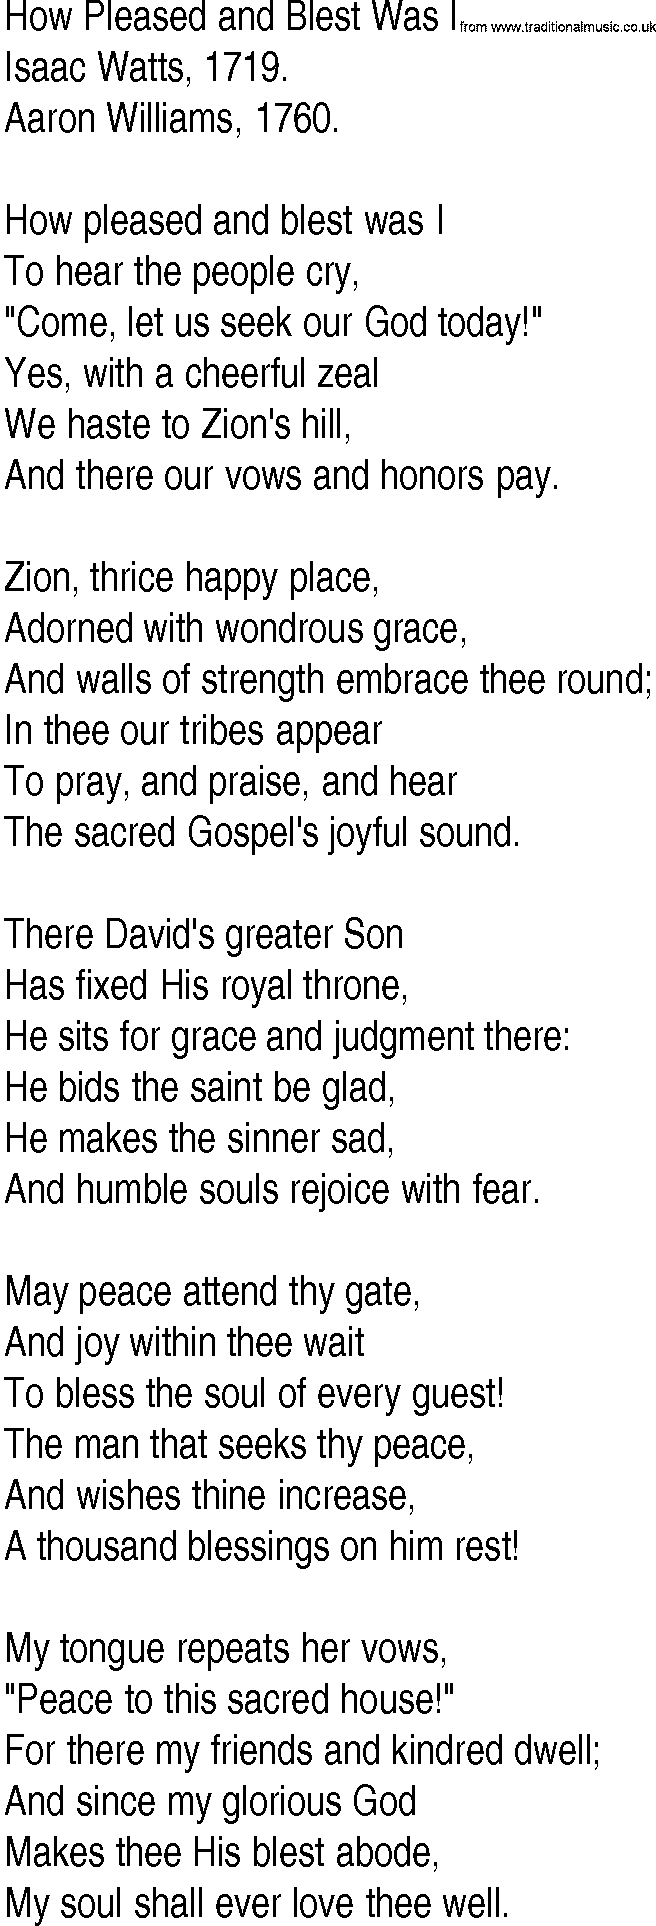 Hymn and Gospel Song: How Pleased and Blest Was I by Isaac Watts lyrics